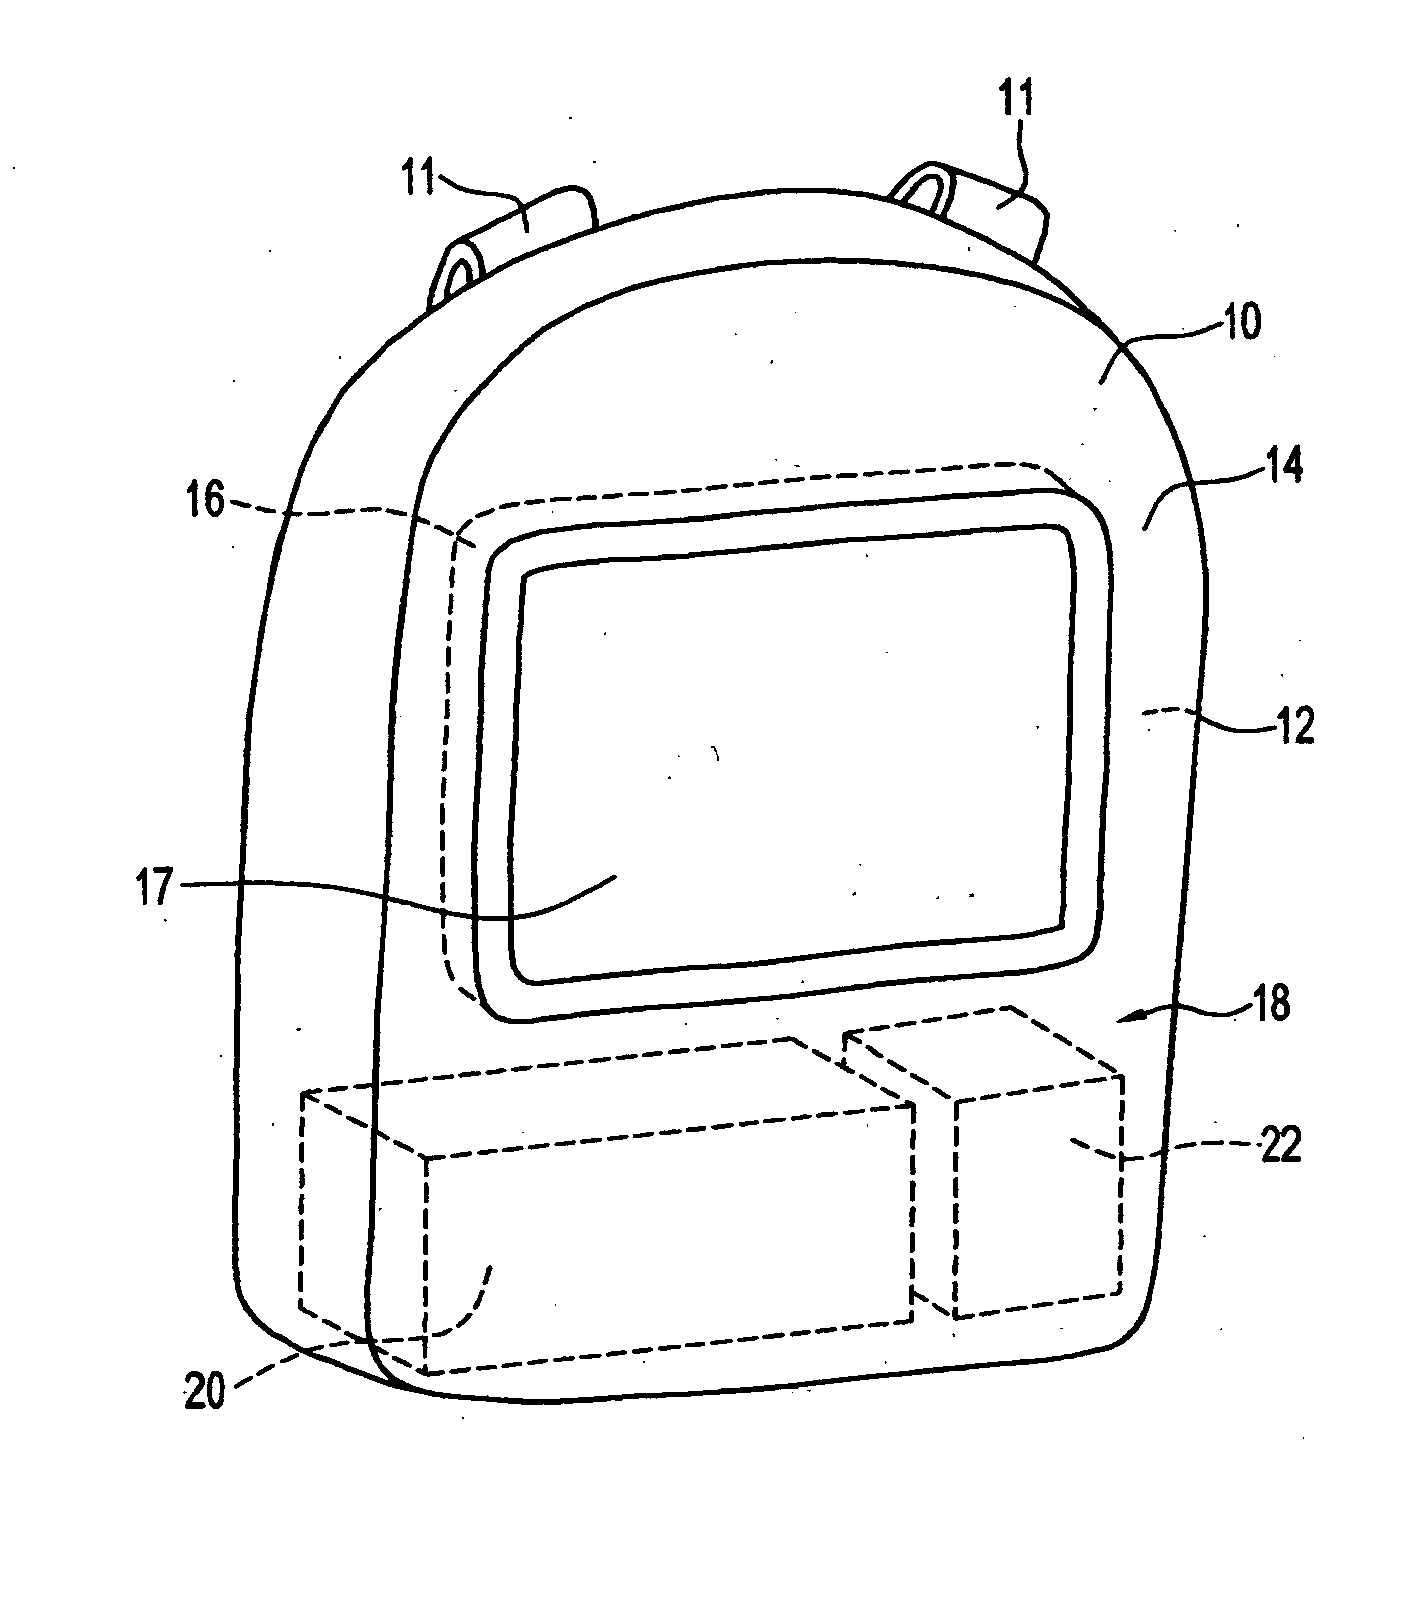 Method and apparatus for advertising using portable flat screen video equipped backpacks